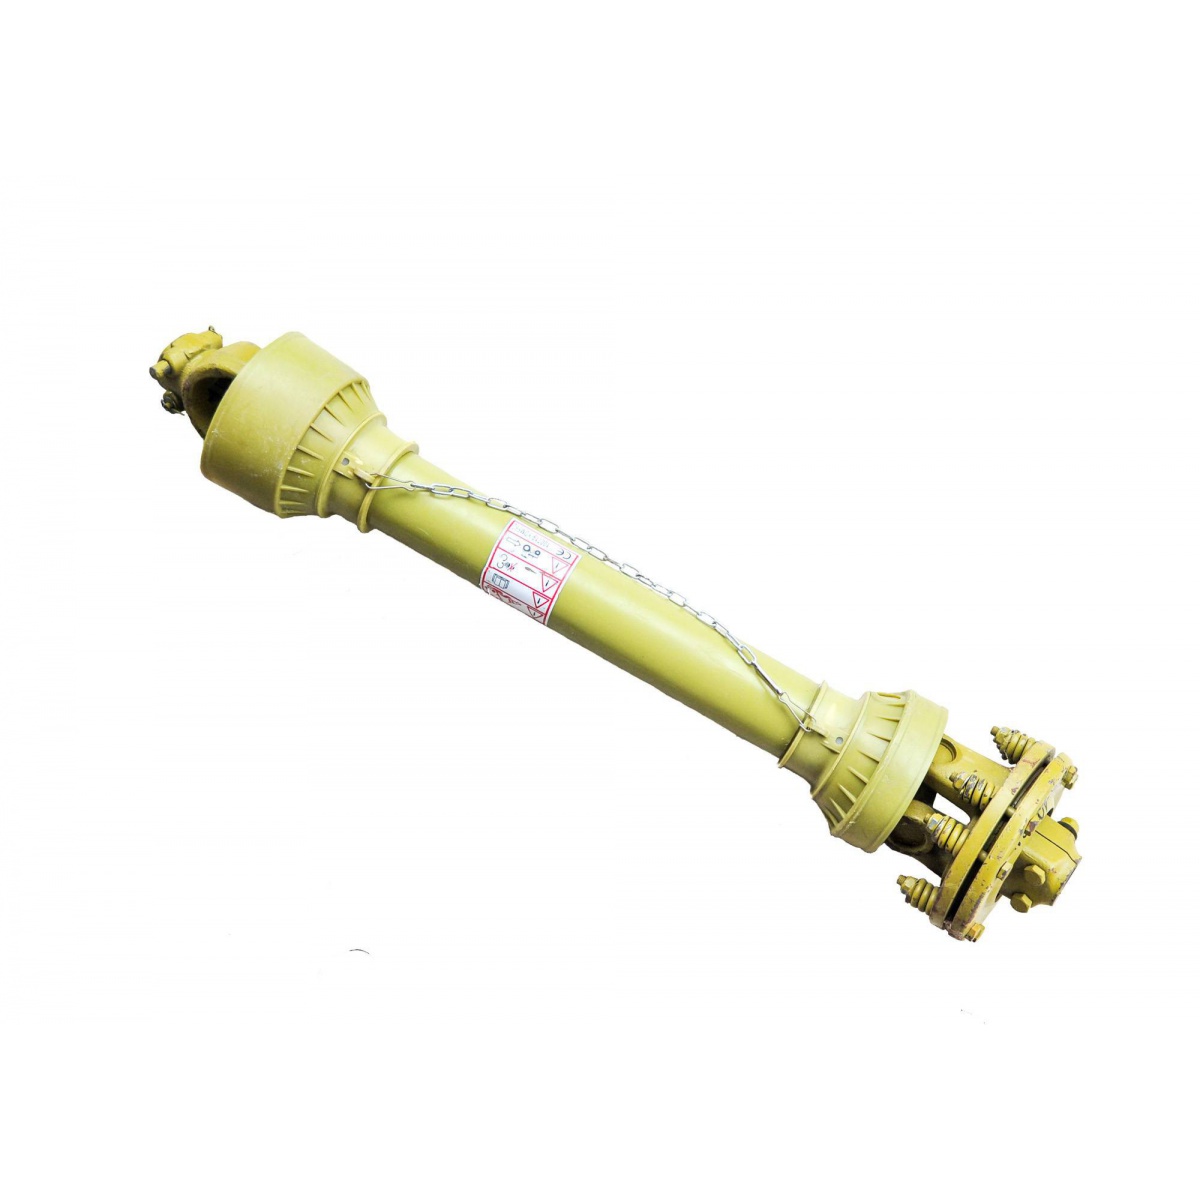 PTO shaft with clutch 07B - 100 cm / up to 105 HP